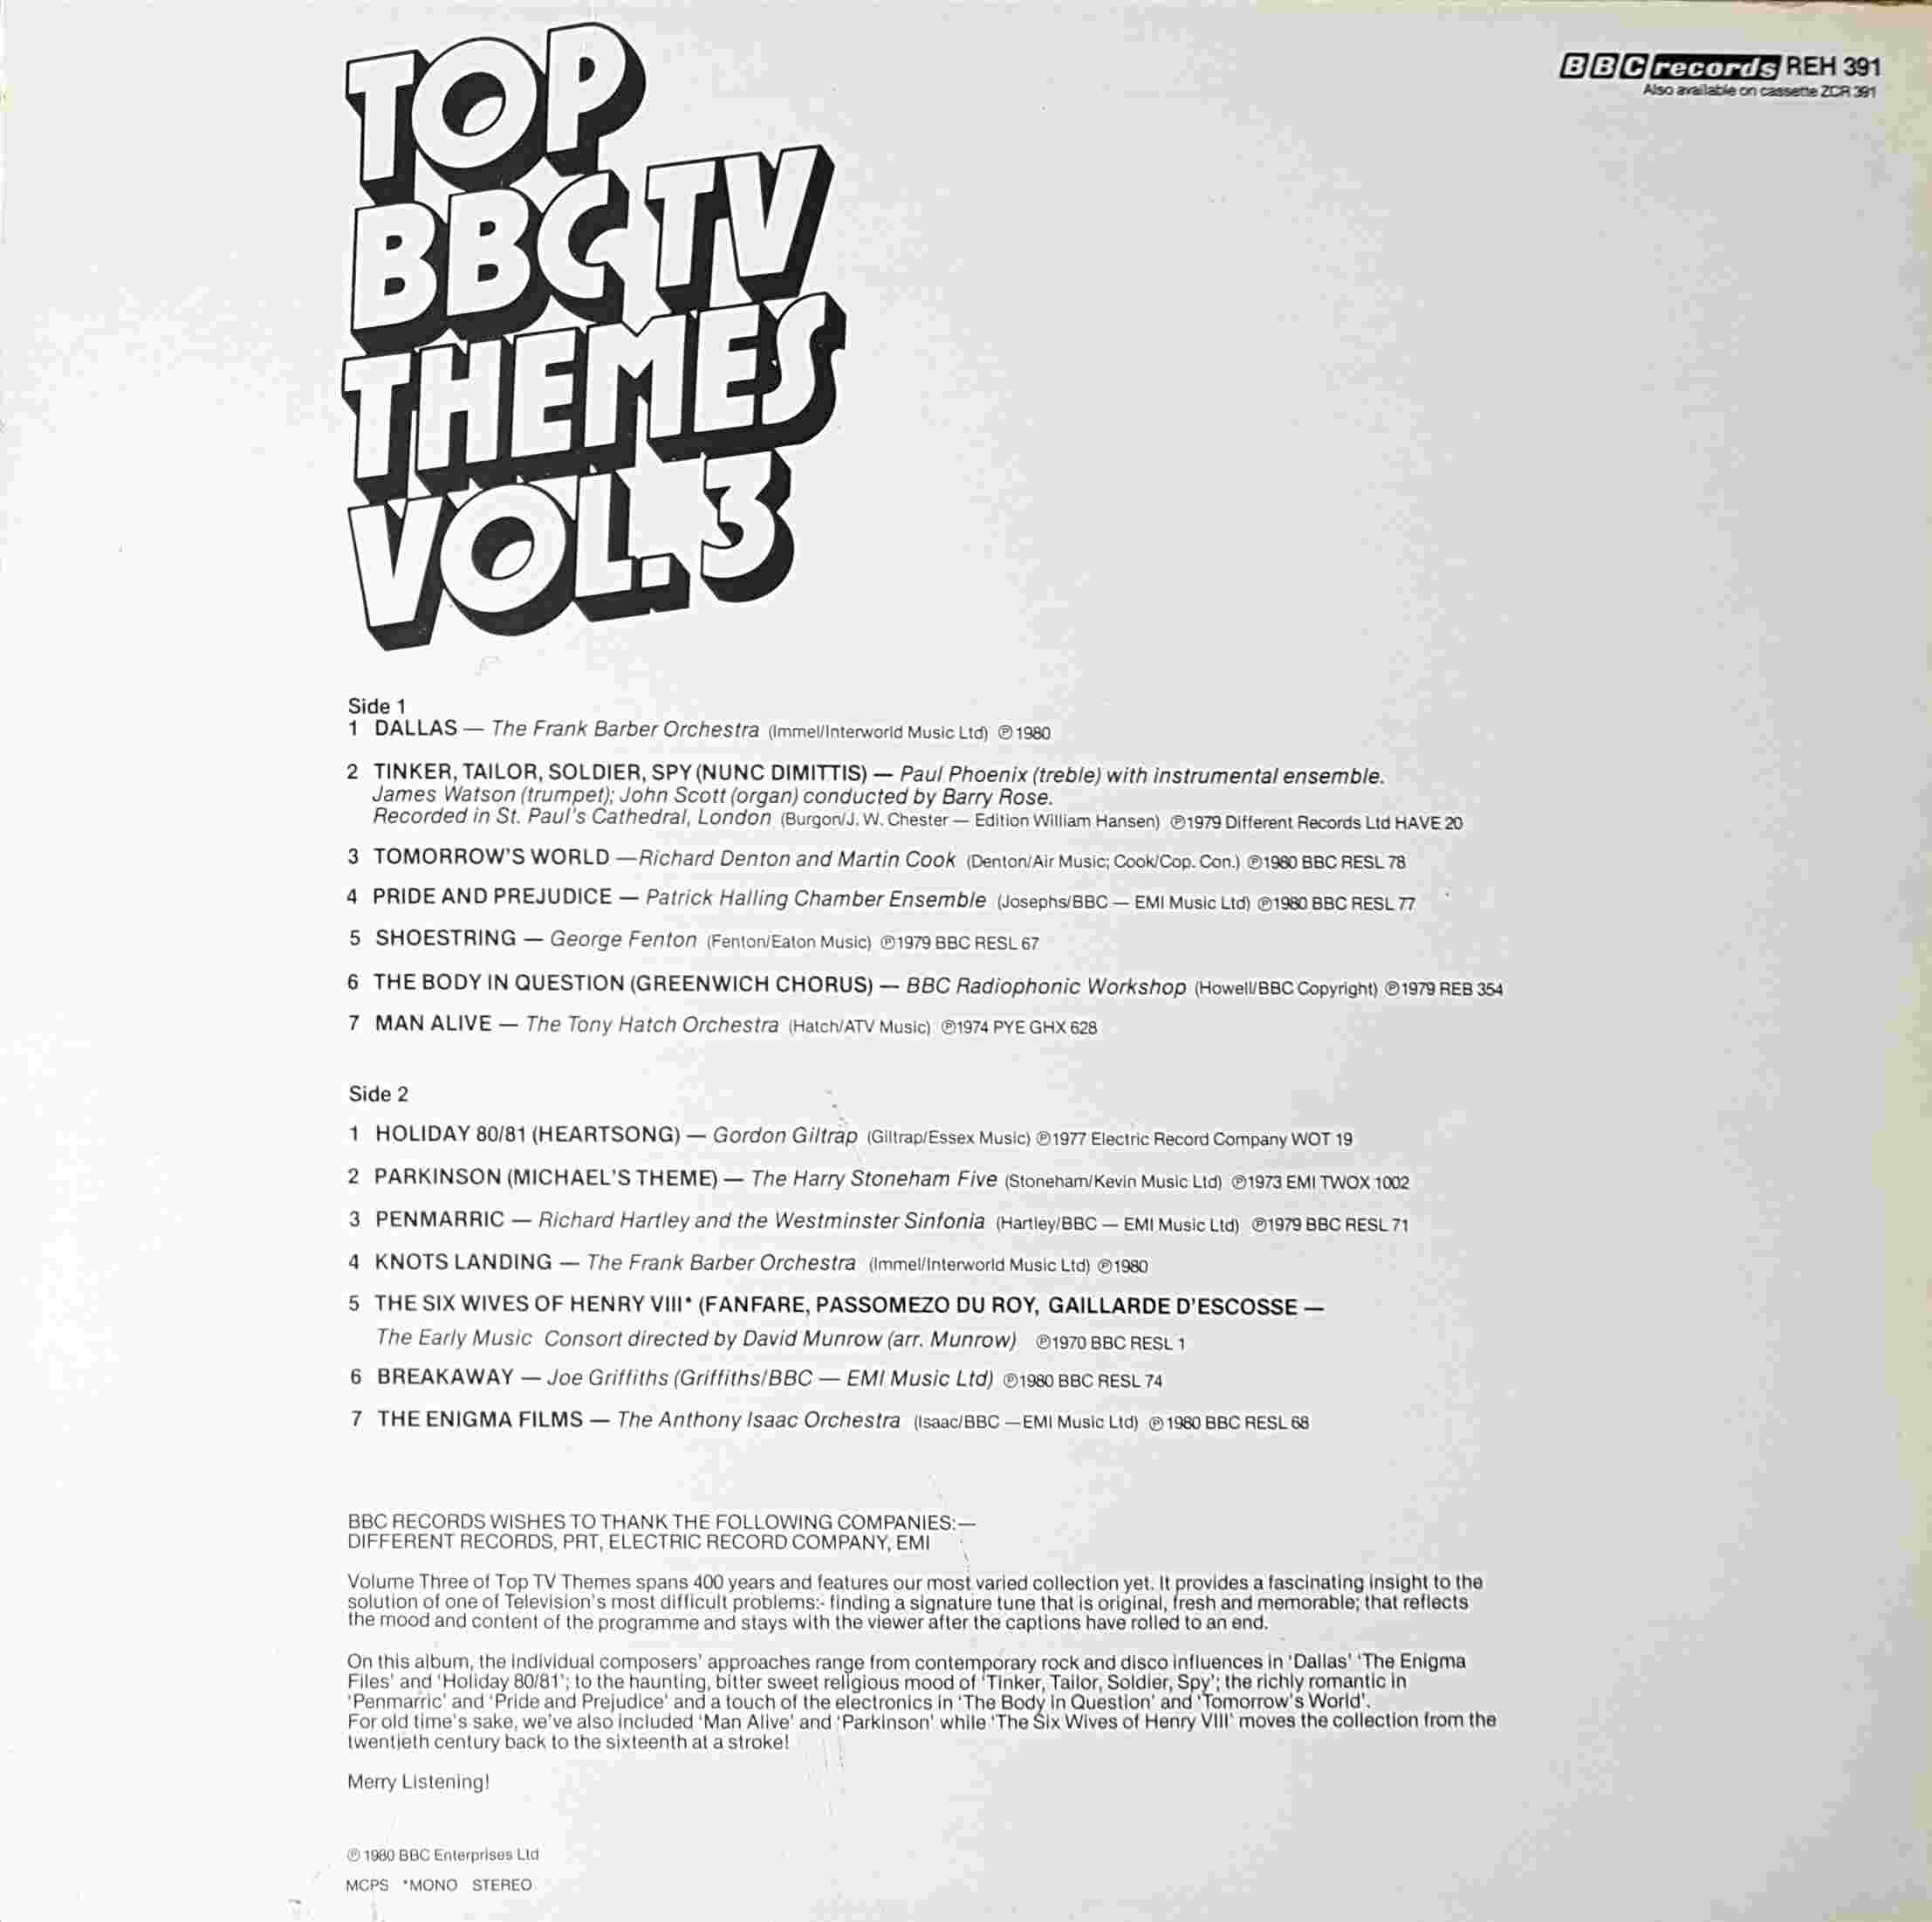 Picture of REH 391 Top BBC TV themes - Volume 3 by artist Various from the BBC records and Tapes library